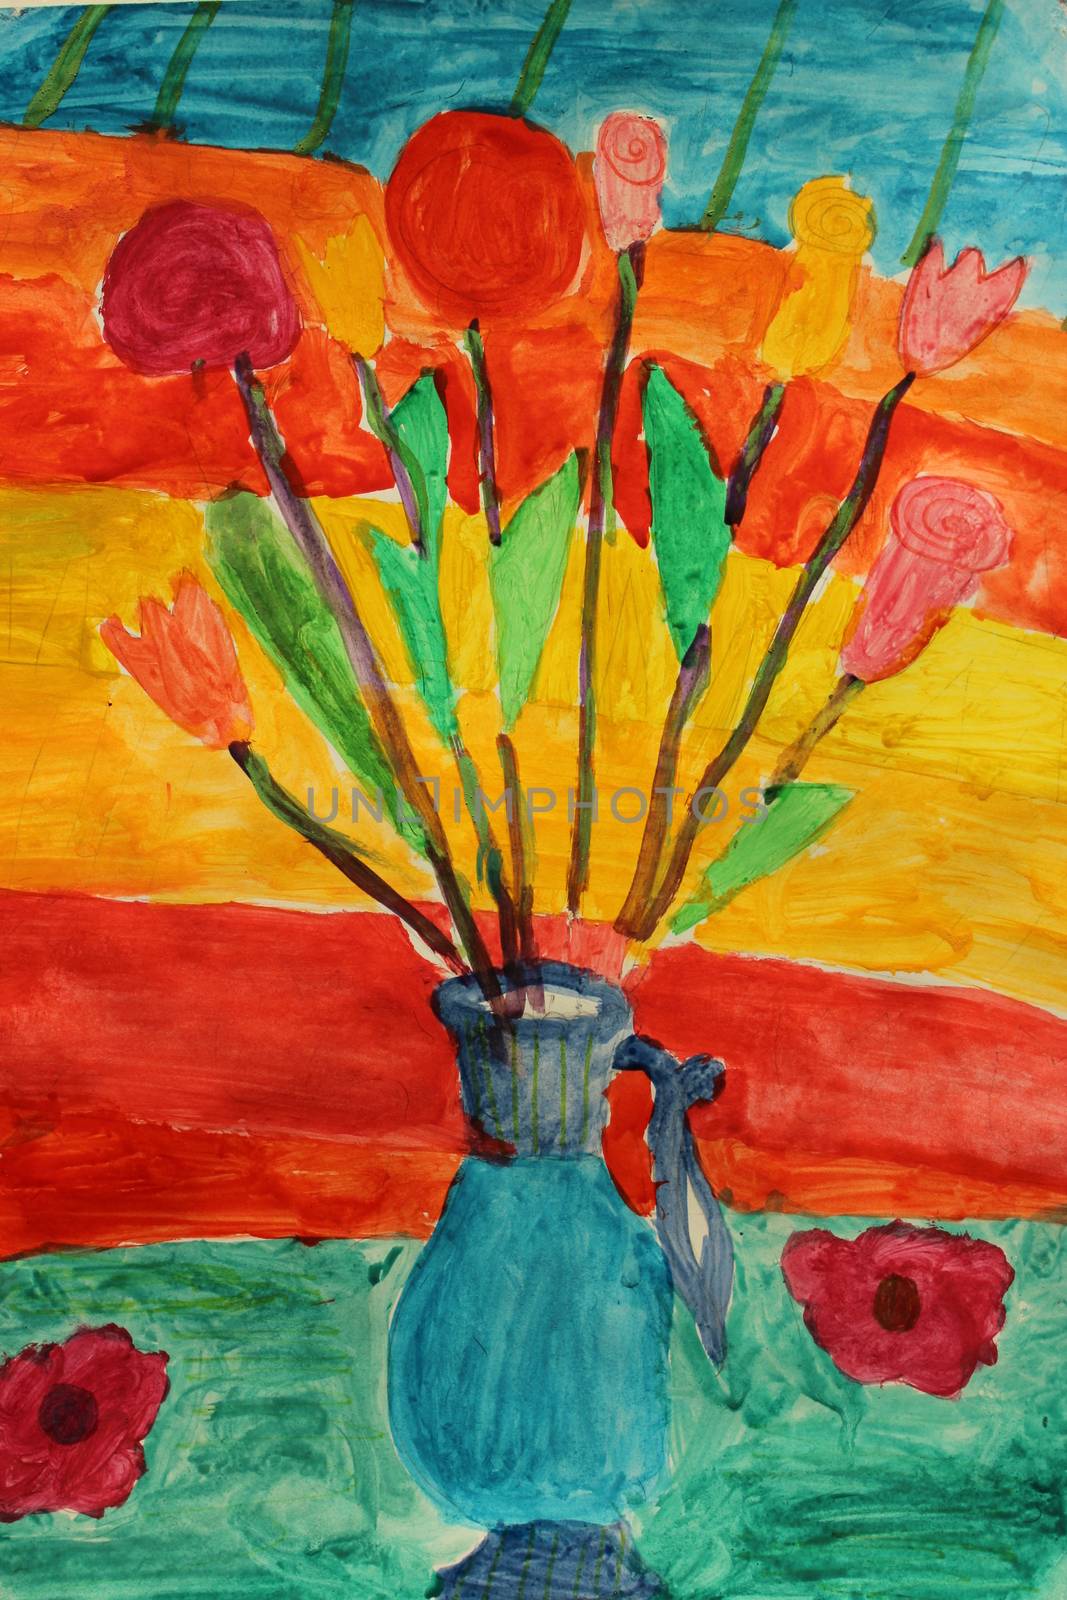 Children's drawing with blue pitcher with flowers by alexmak